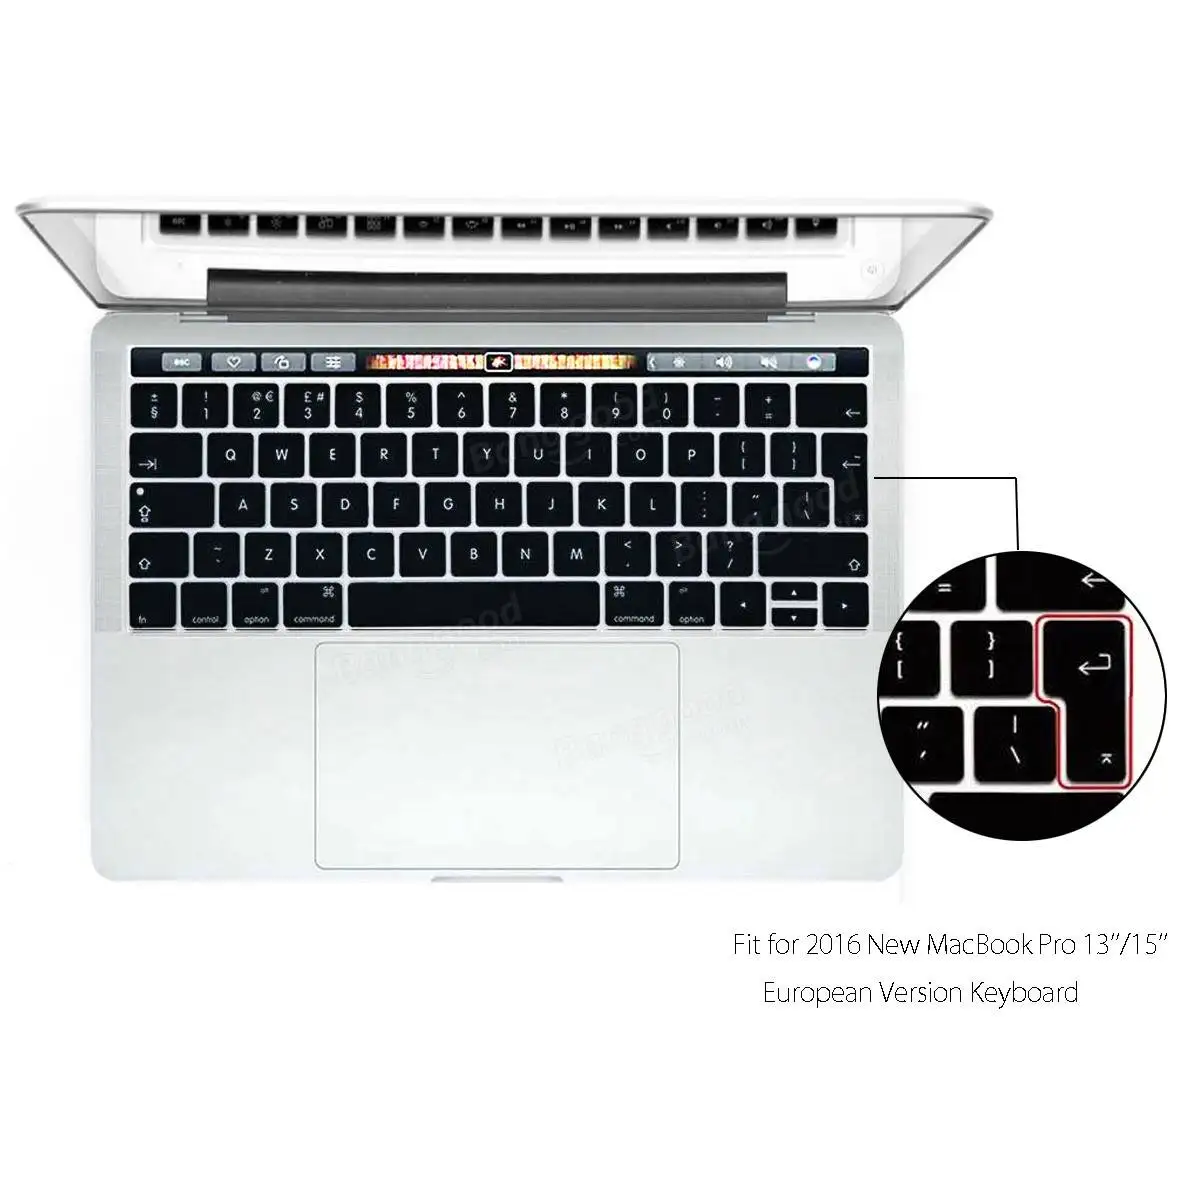 Silicone Laptop Keyboard Cover For 2016 New Macbook Pro 13' Inch / 15 Inch EU Version